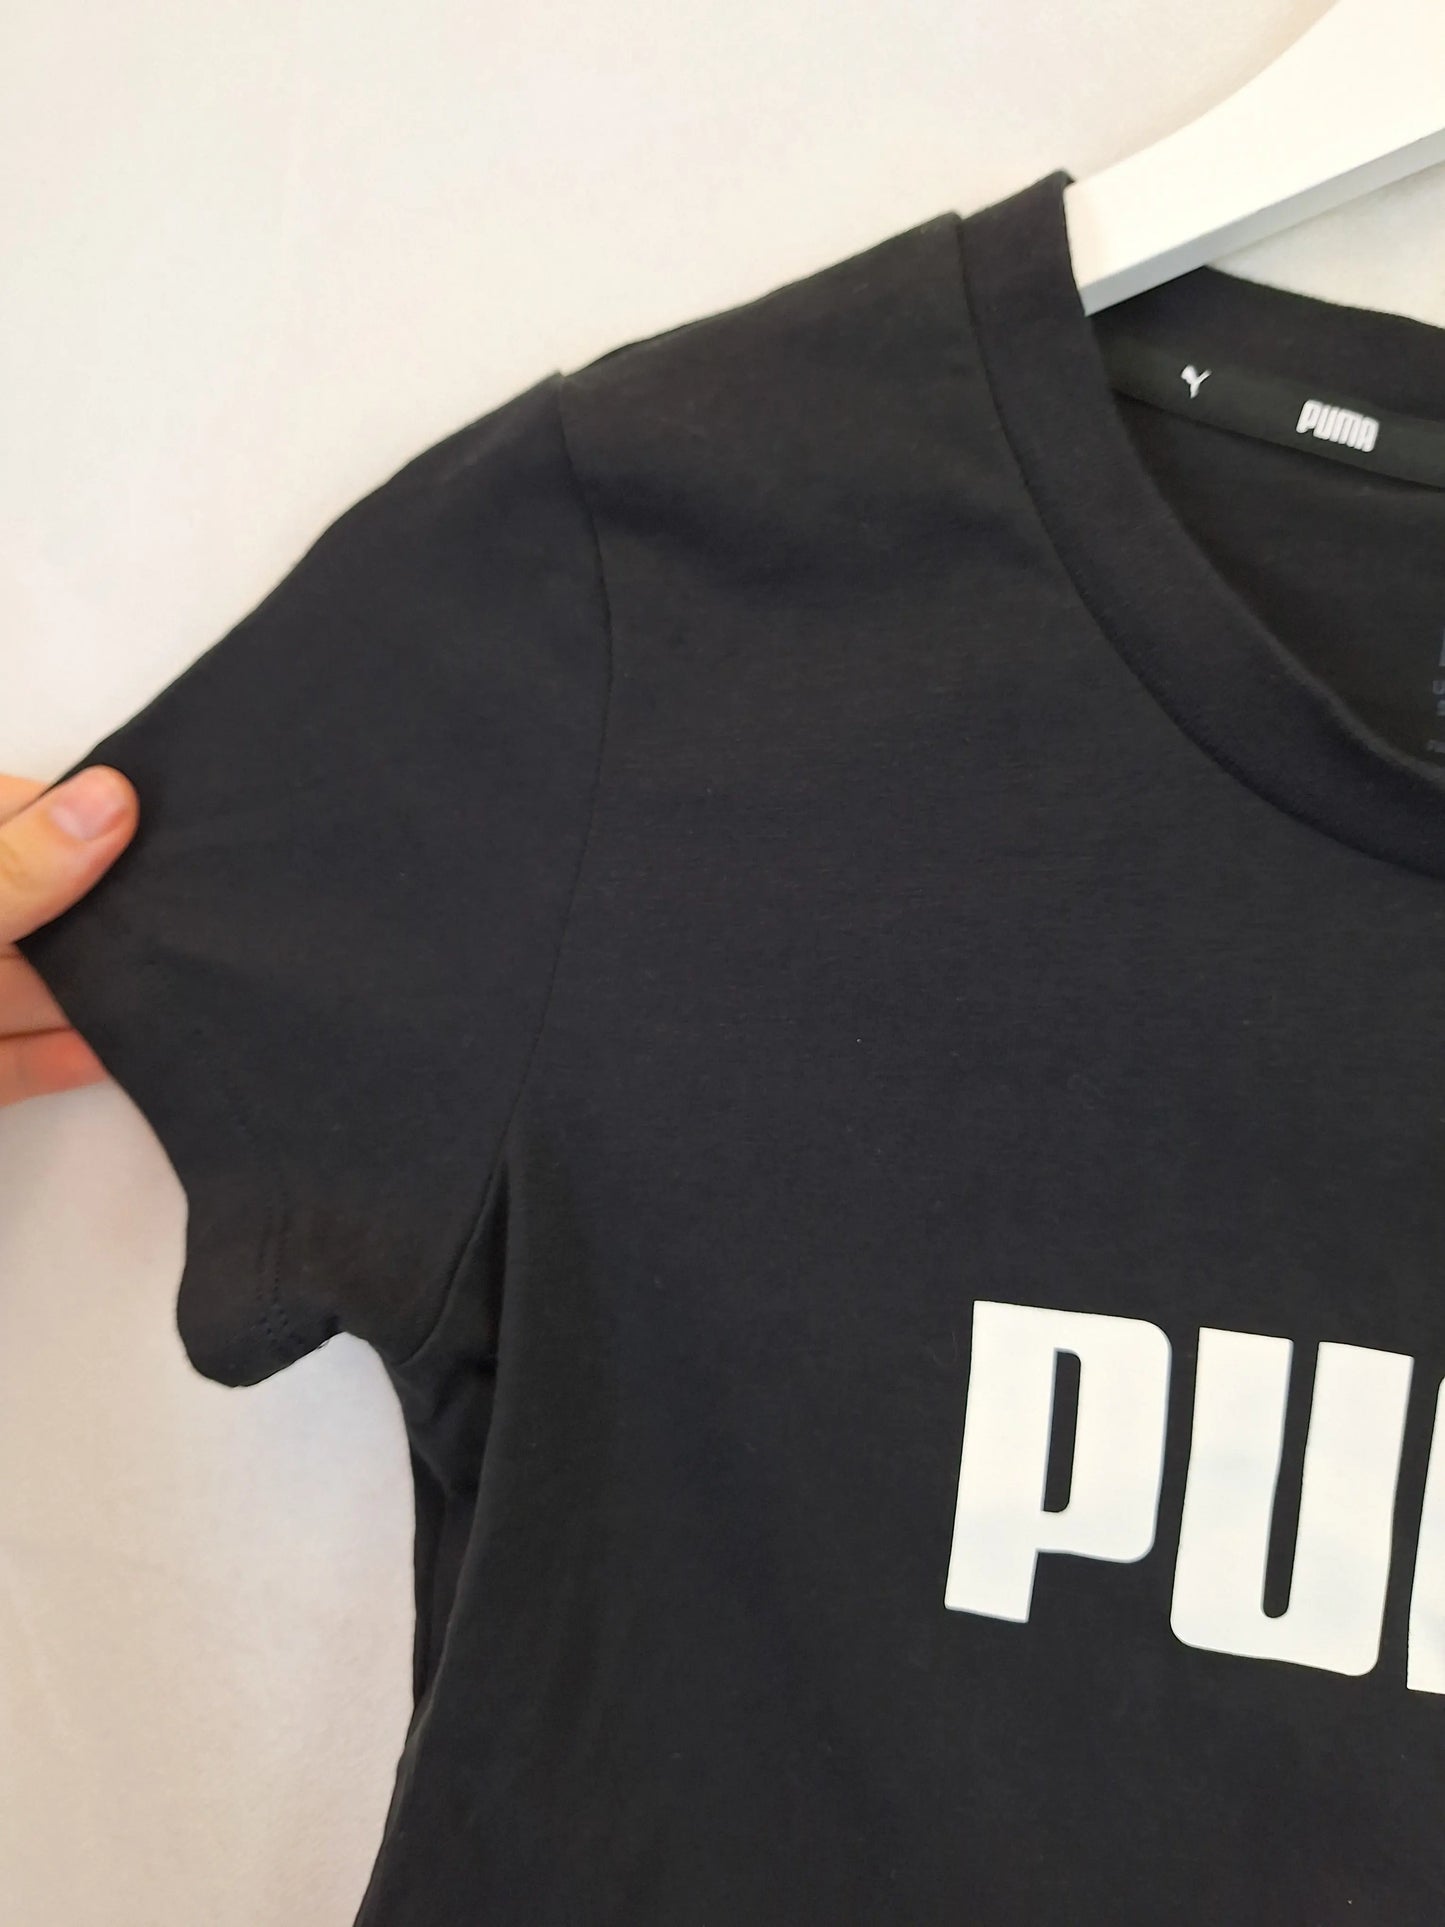 PUMA Cropped Crew Neck  T-shirt Size S by SwapUp-Online Second Hand Store-Online Thrift Store